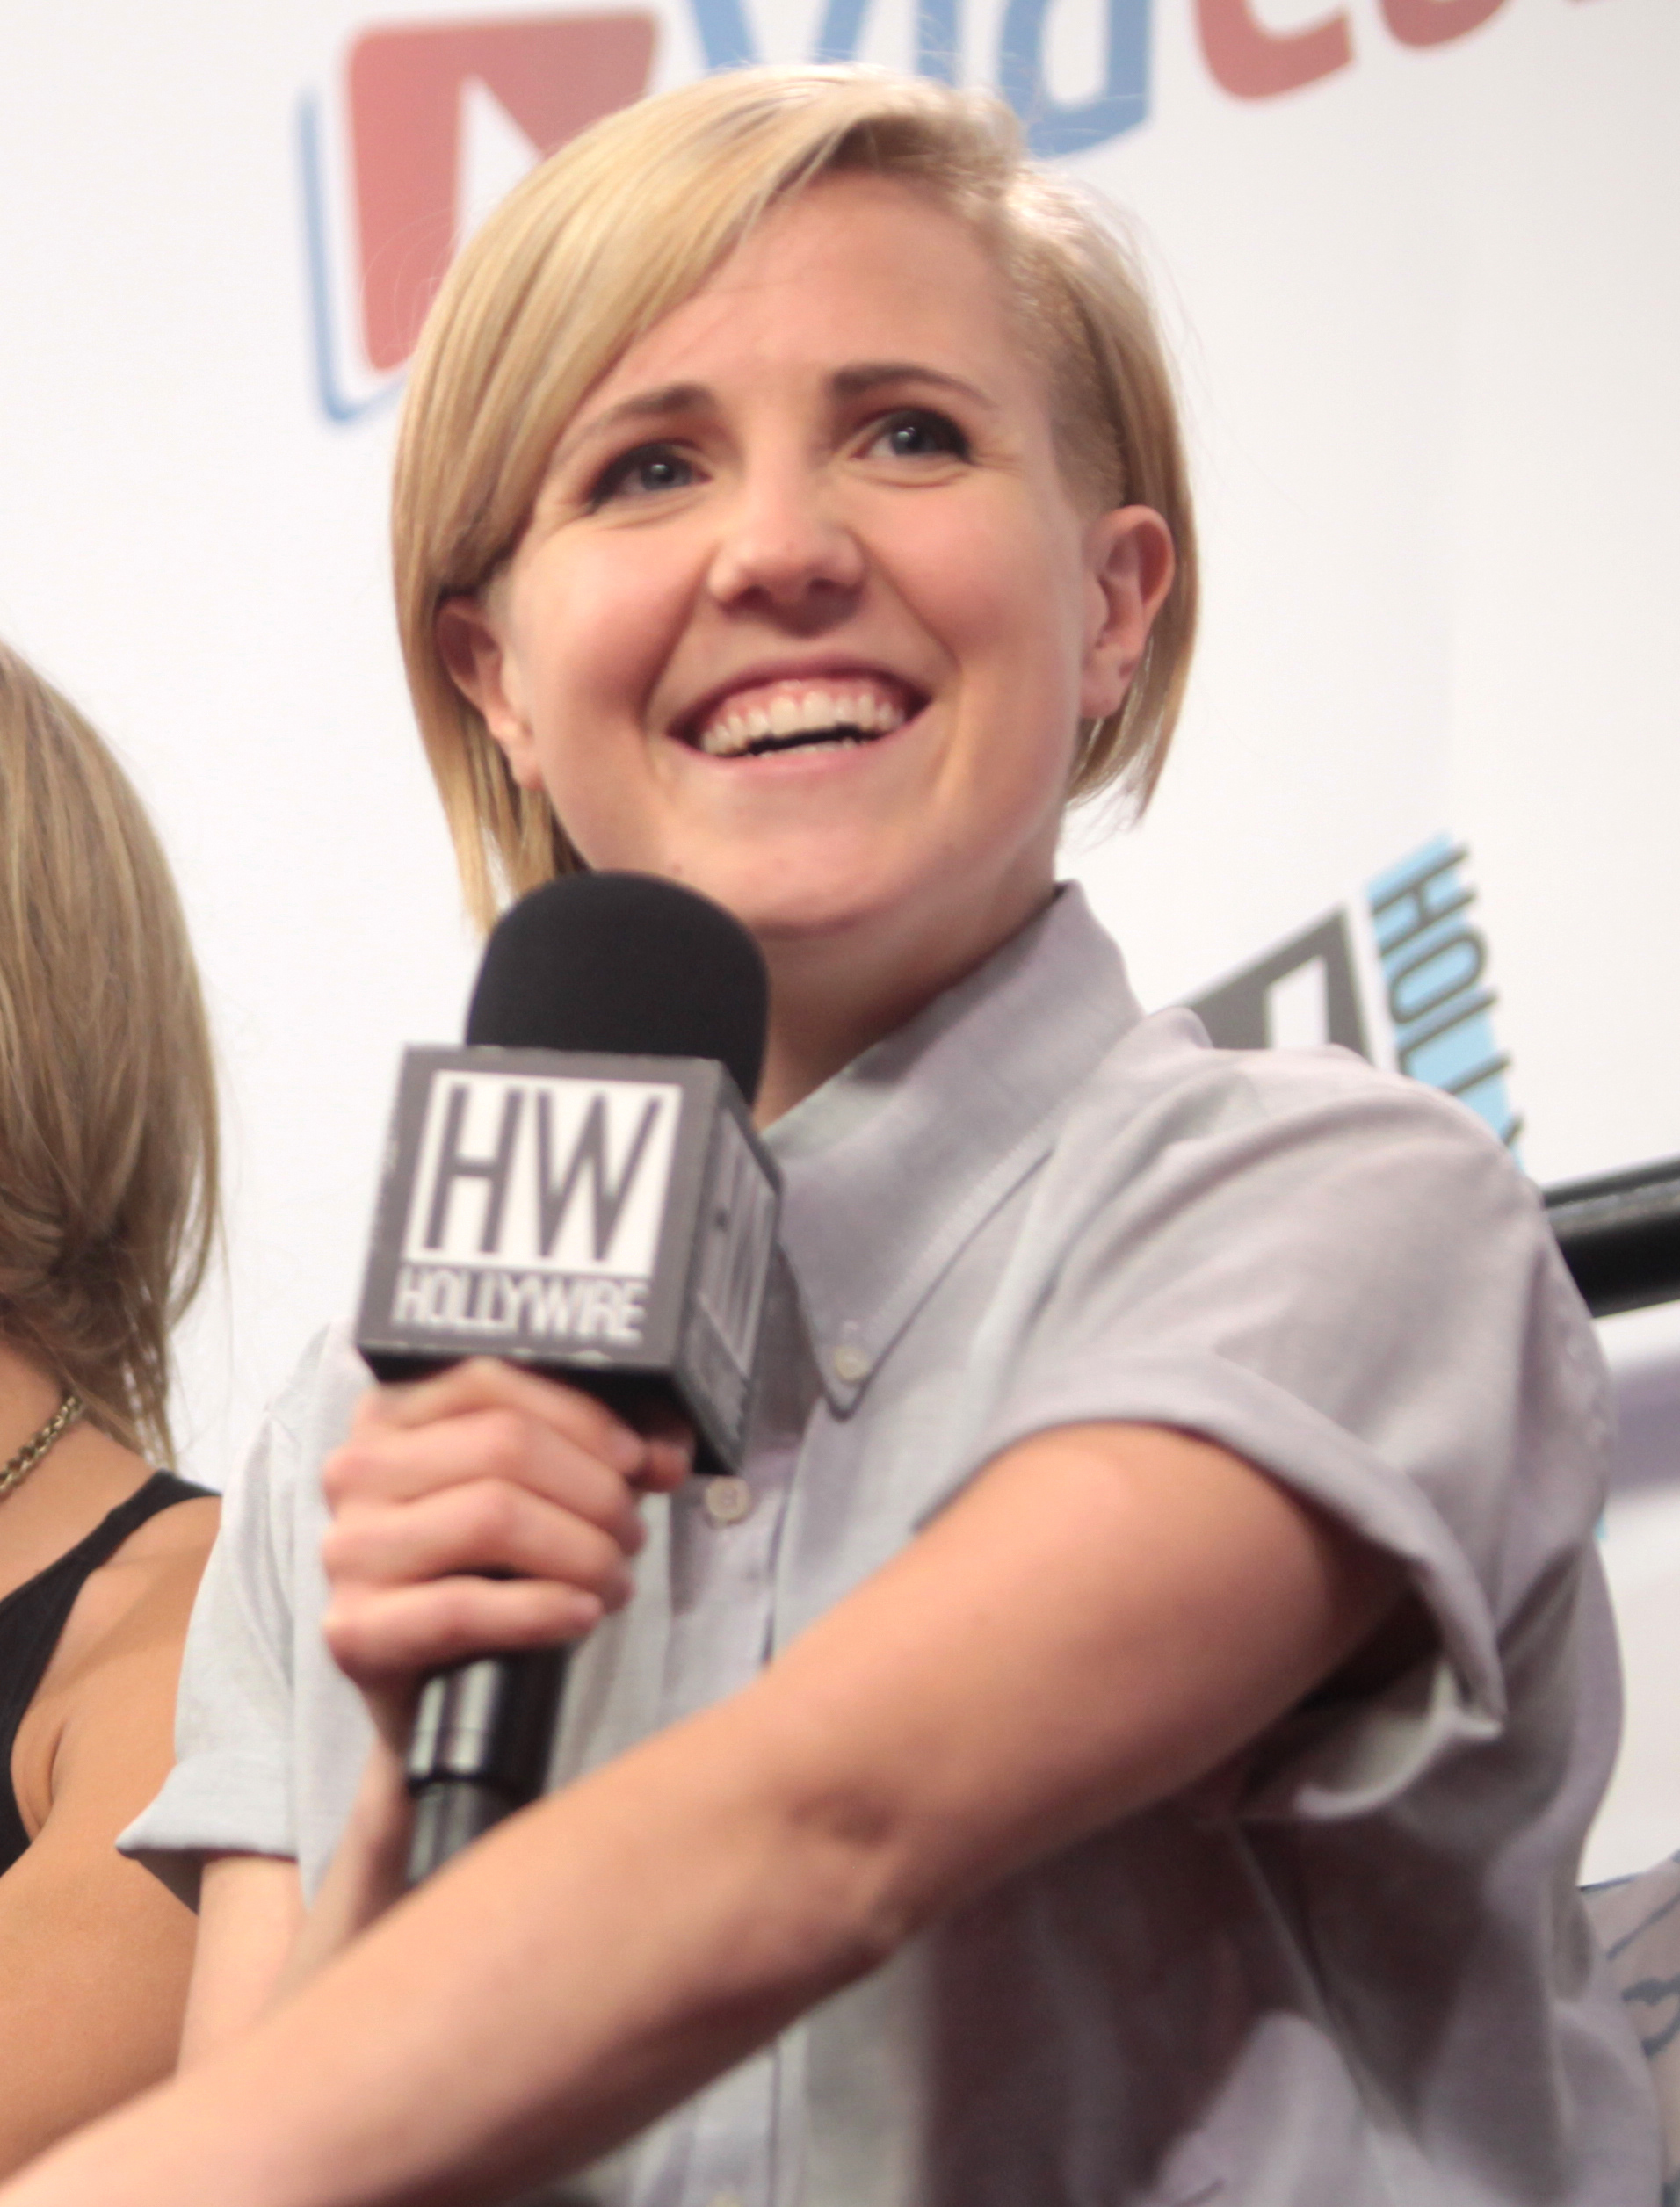 A woman holding a microphone smiles.